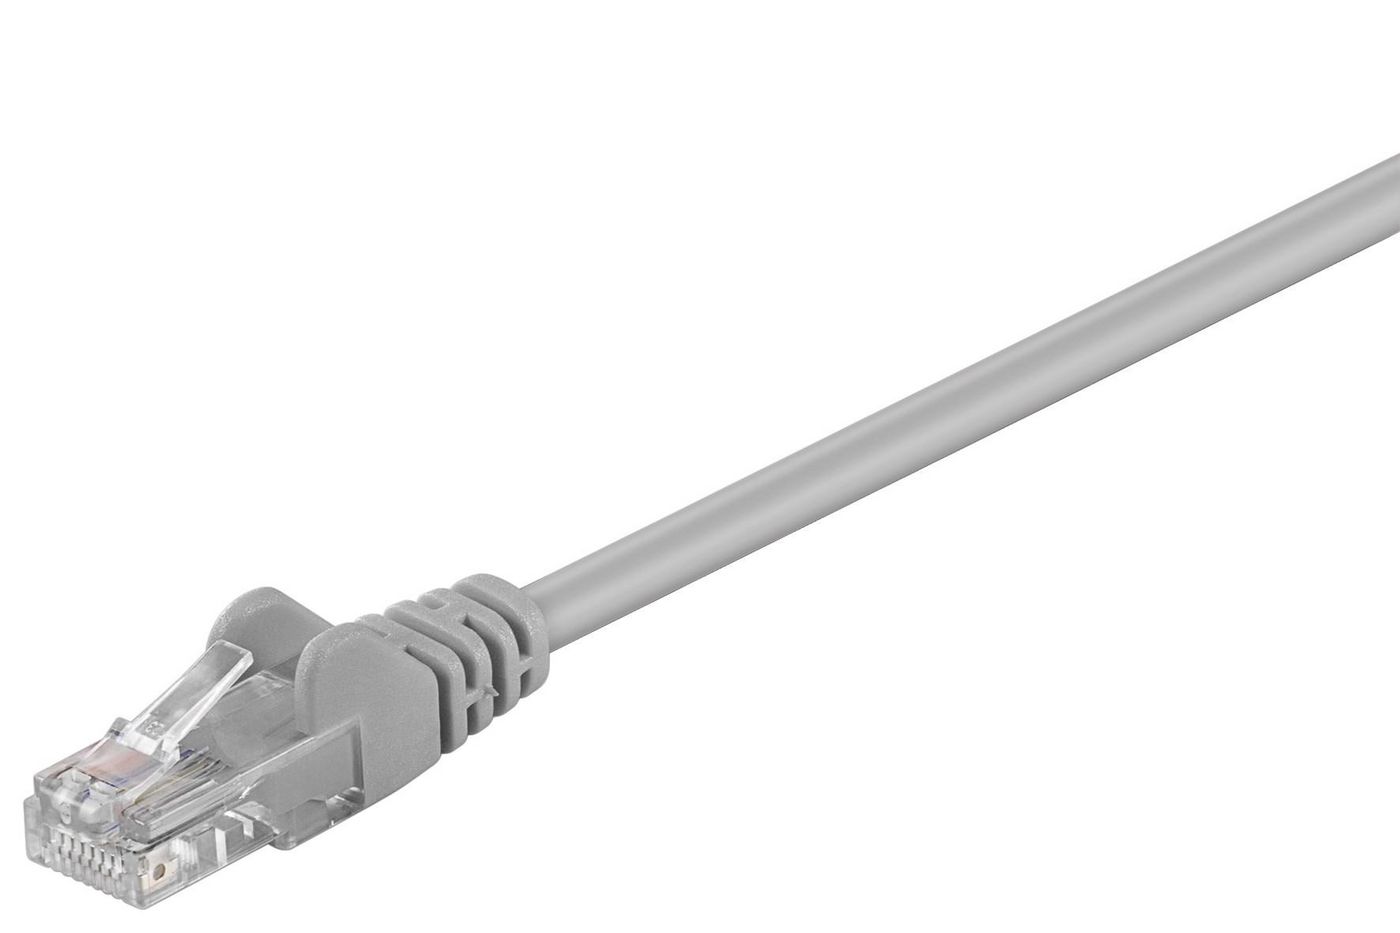 Patch Cable - Cat 5e - Utp - 15m - Grey